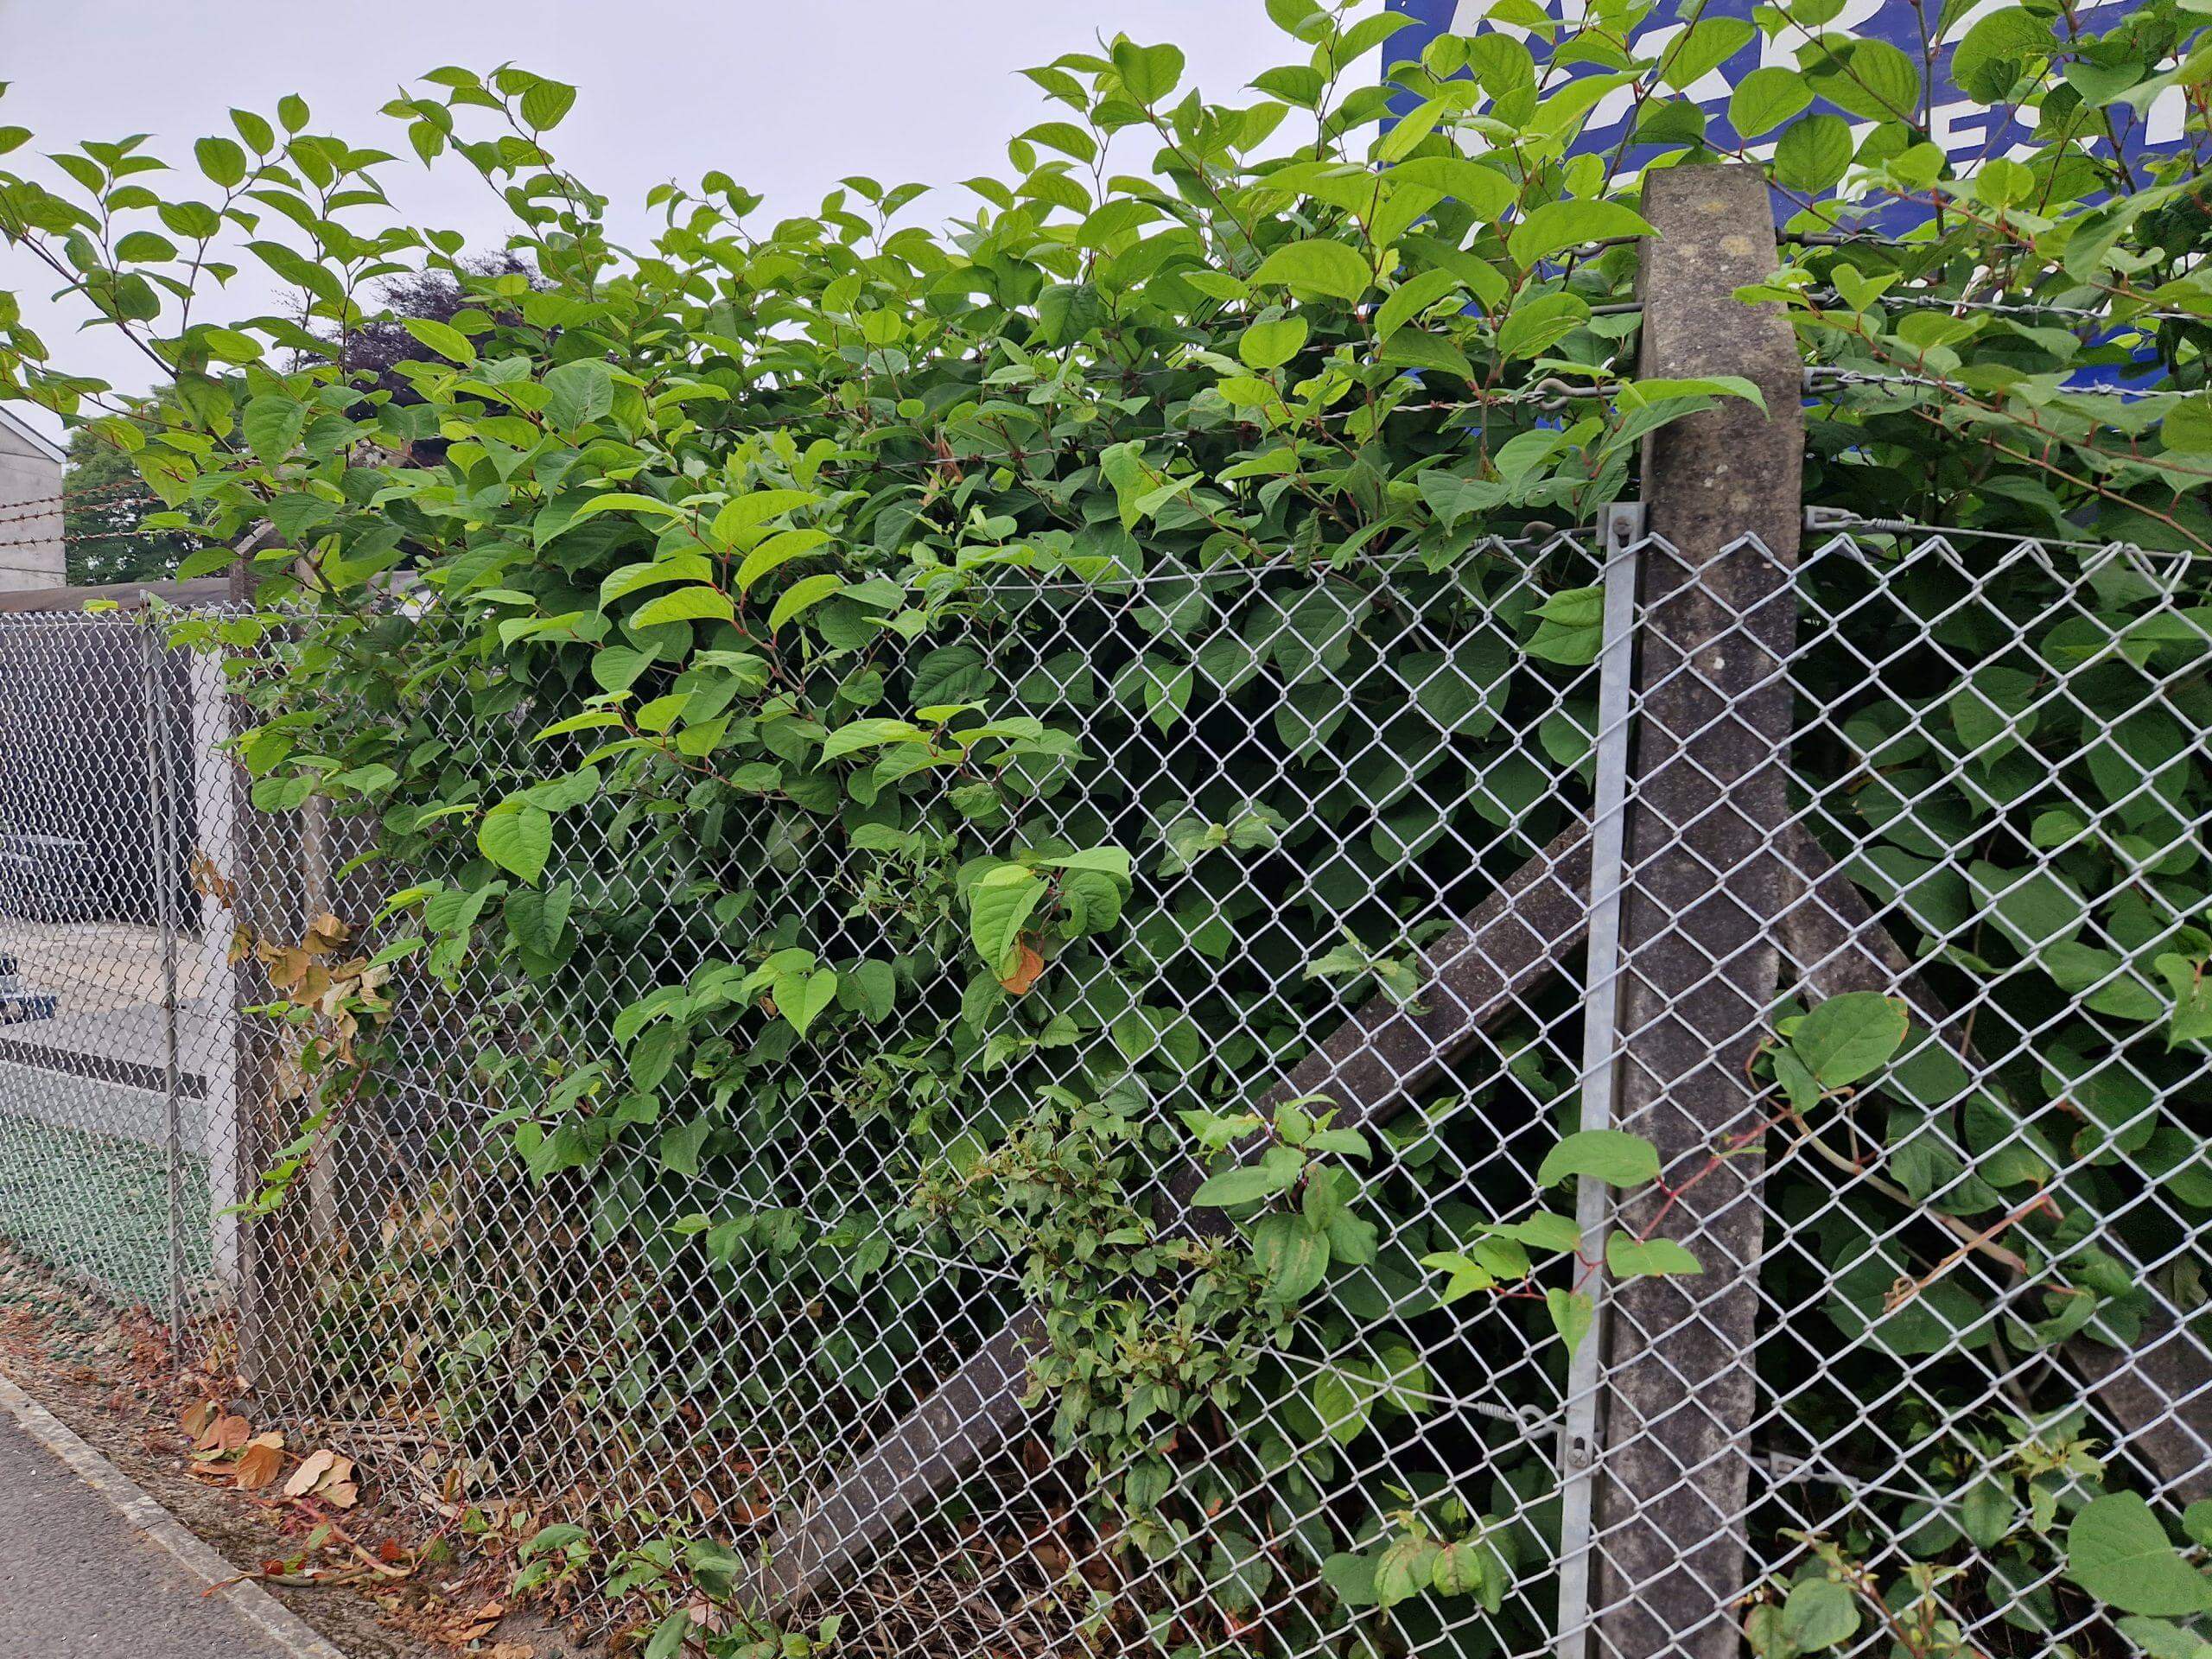 Japanese knotweed growing on commercial land and ready for treatment